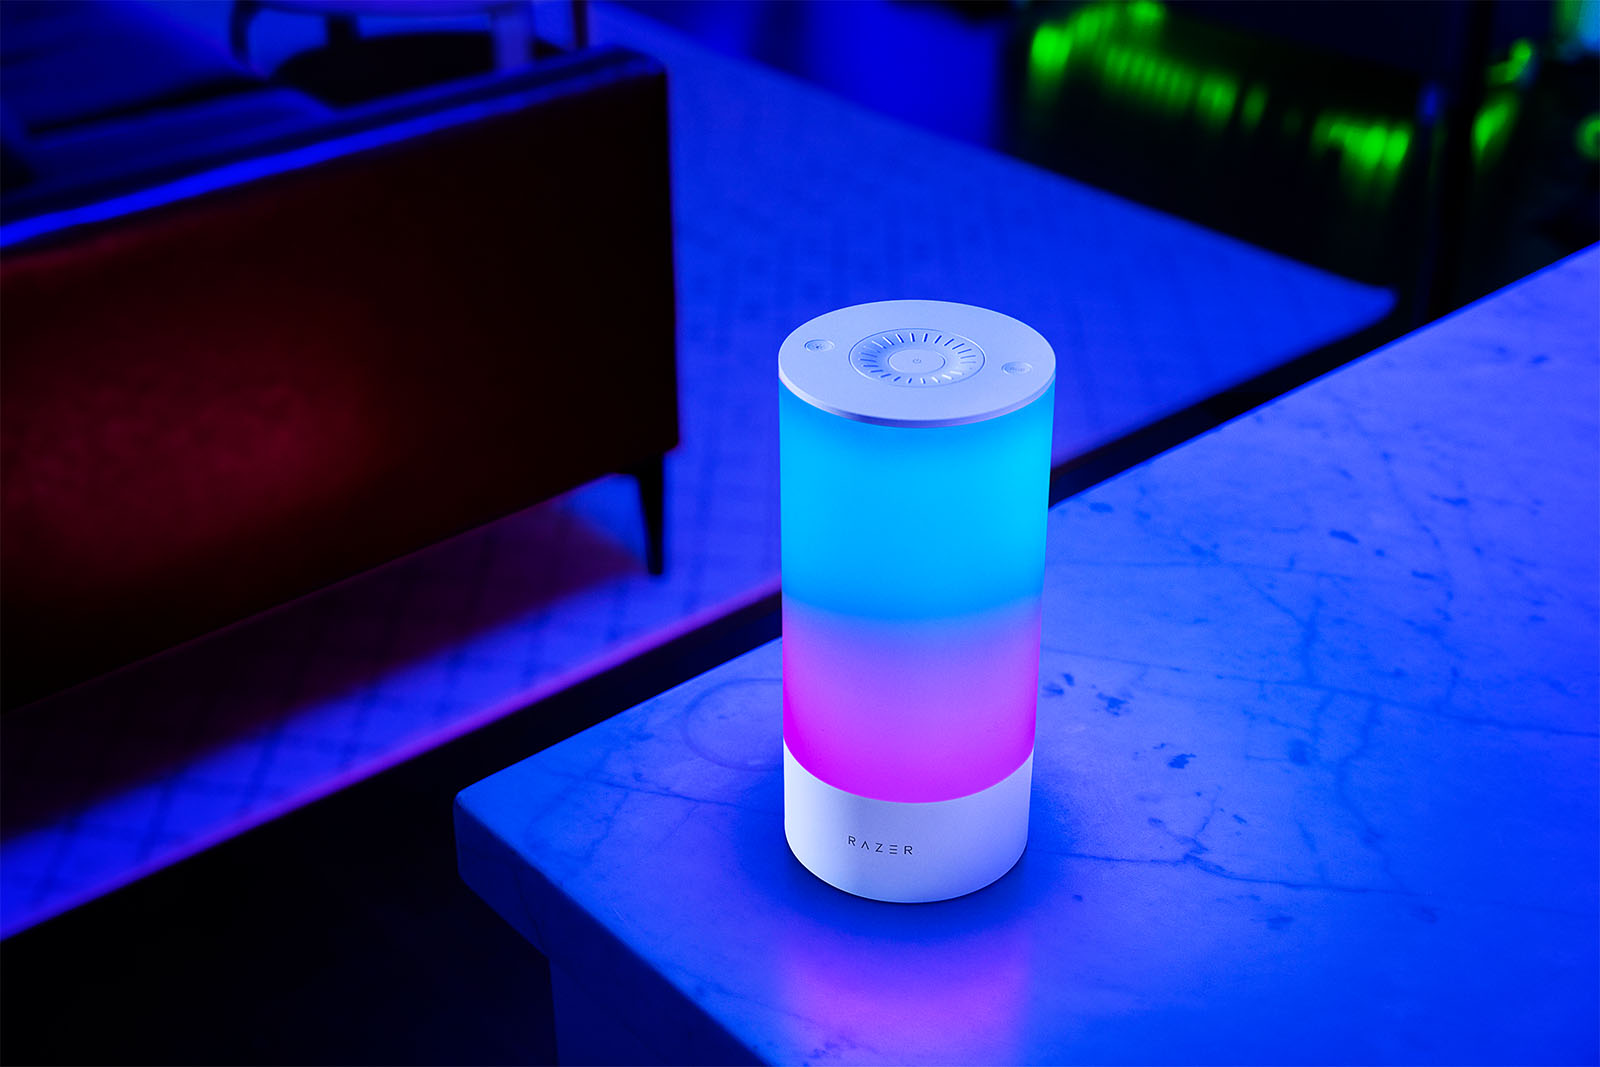 Razer's Aether Lamp Pro lit with blue lights at the top and purple on the bottom half.